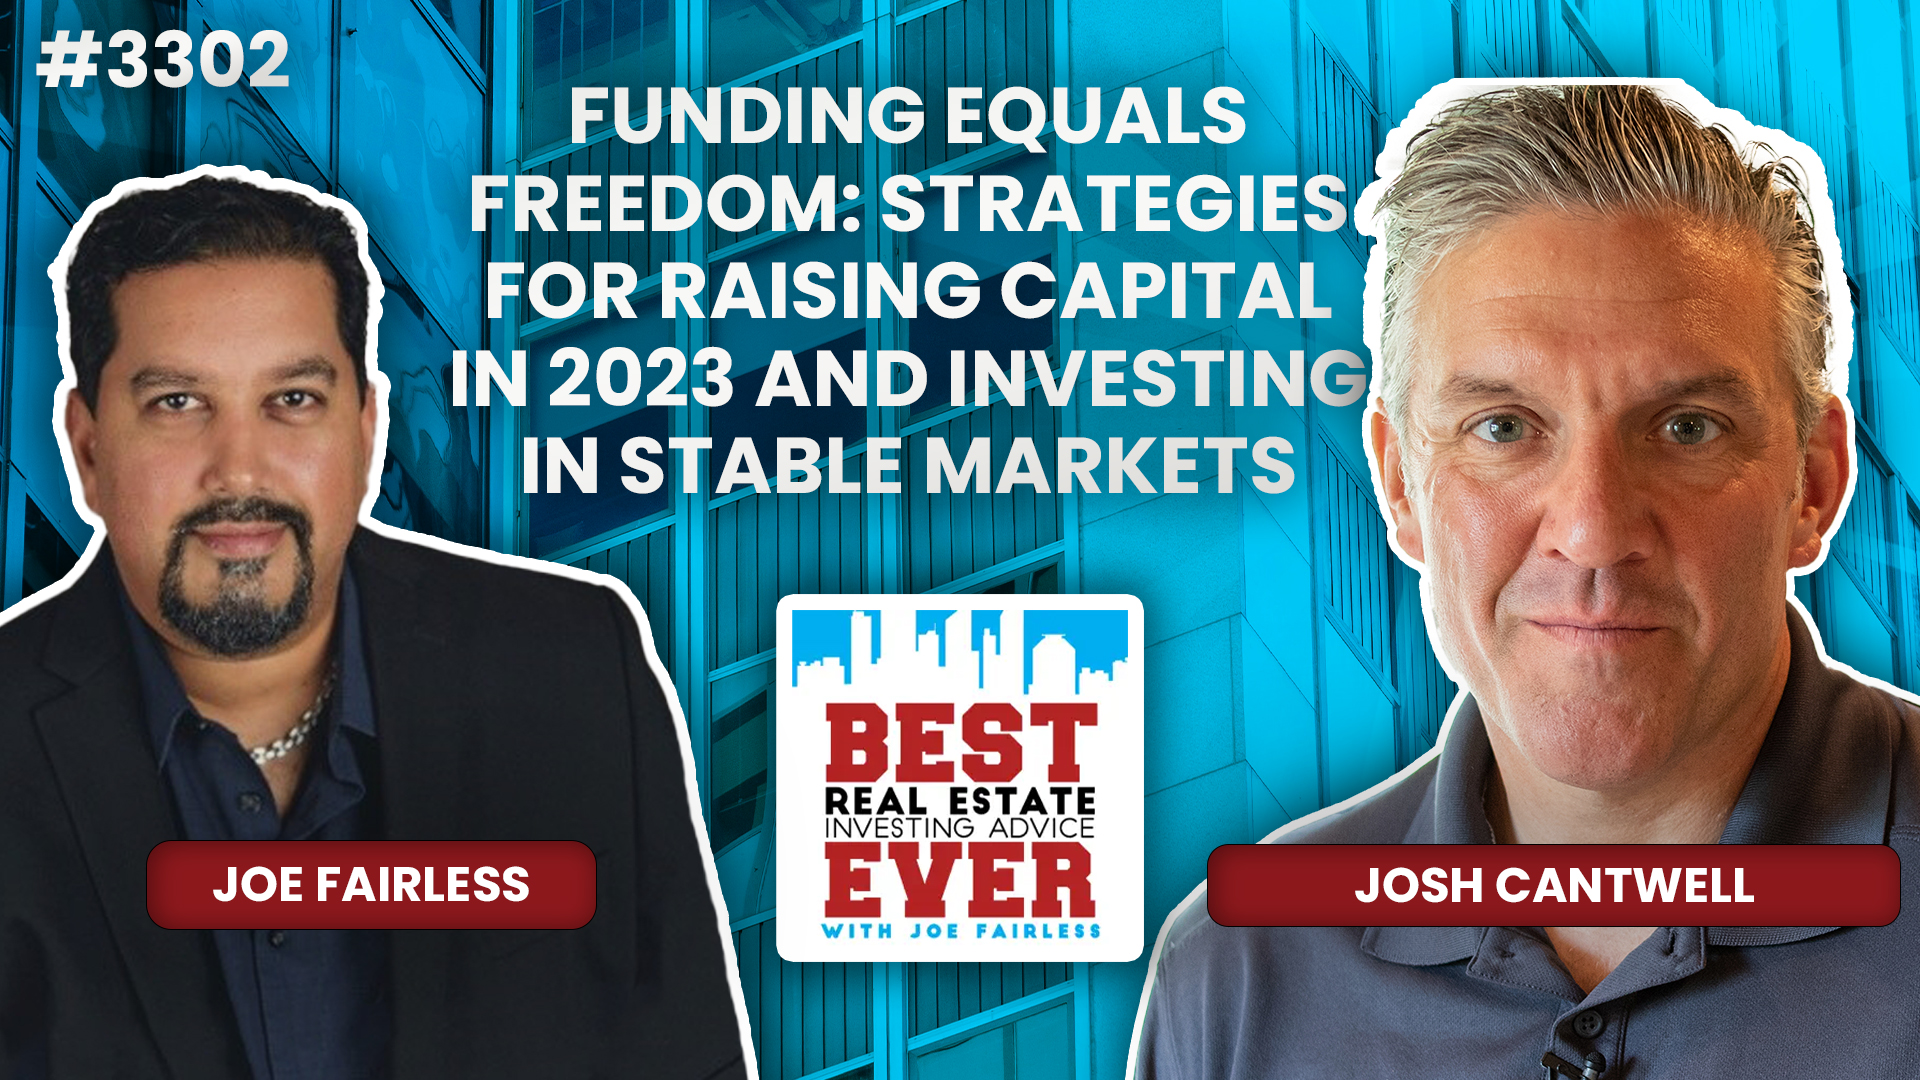 JF3302: Josh Cantwell - Funding Equals Freedom: Strategies for Raising Capital in 2023 and Investing in Stable Markets